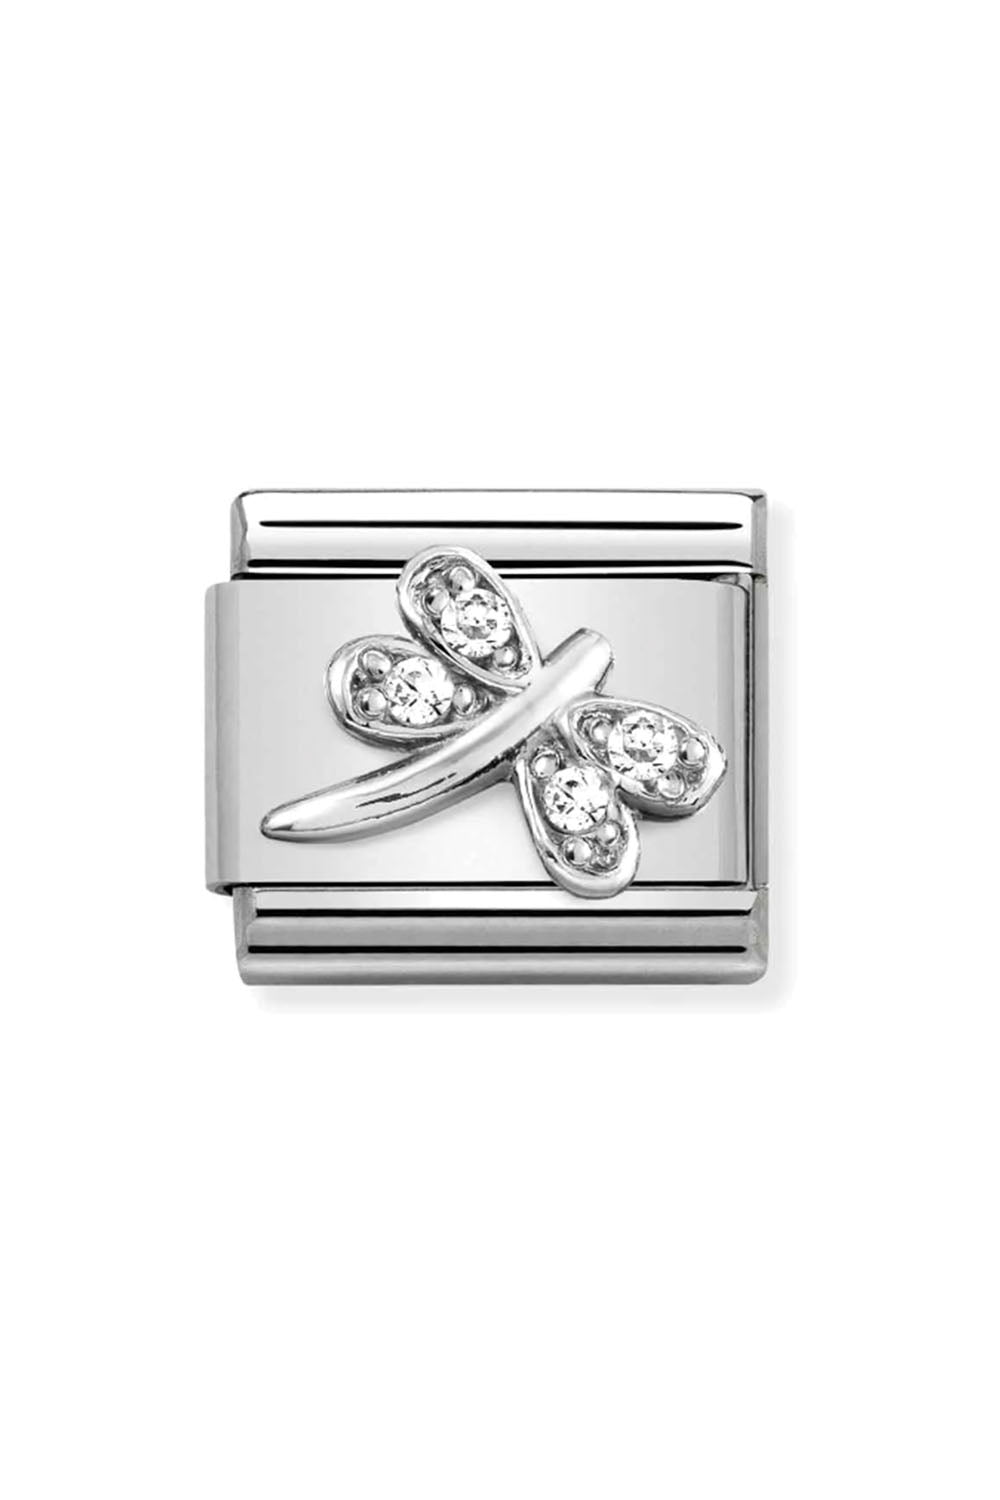 Symbols 925 Sterling Silver with CZ dragonfly